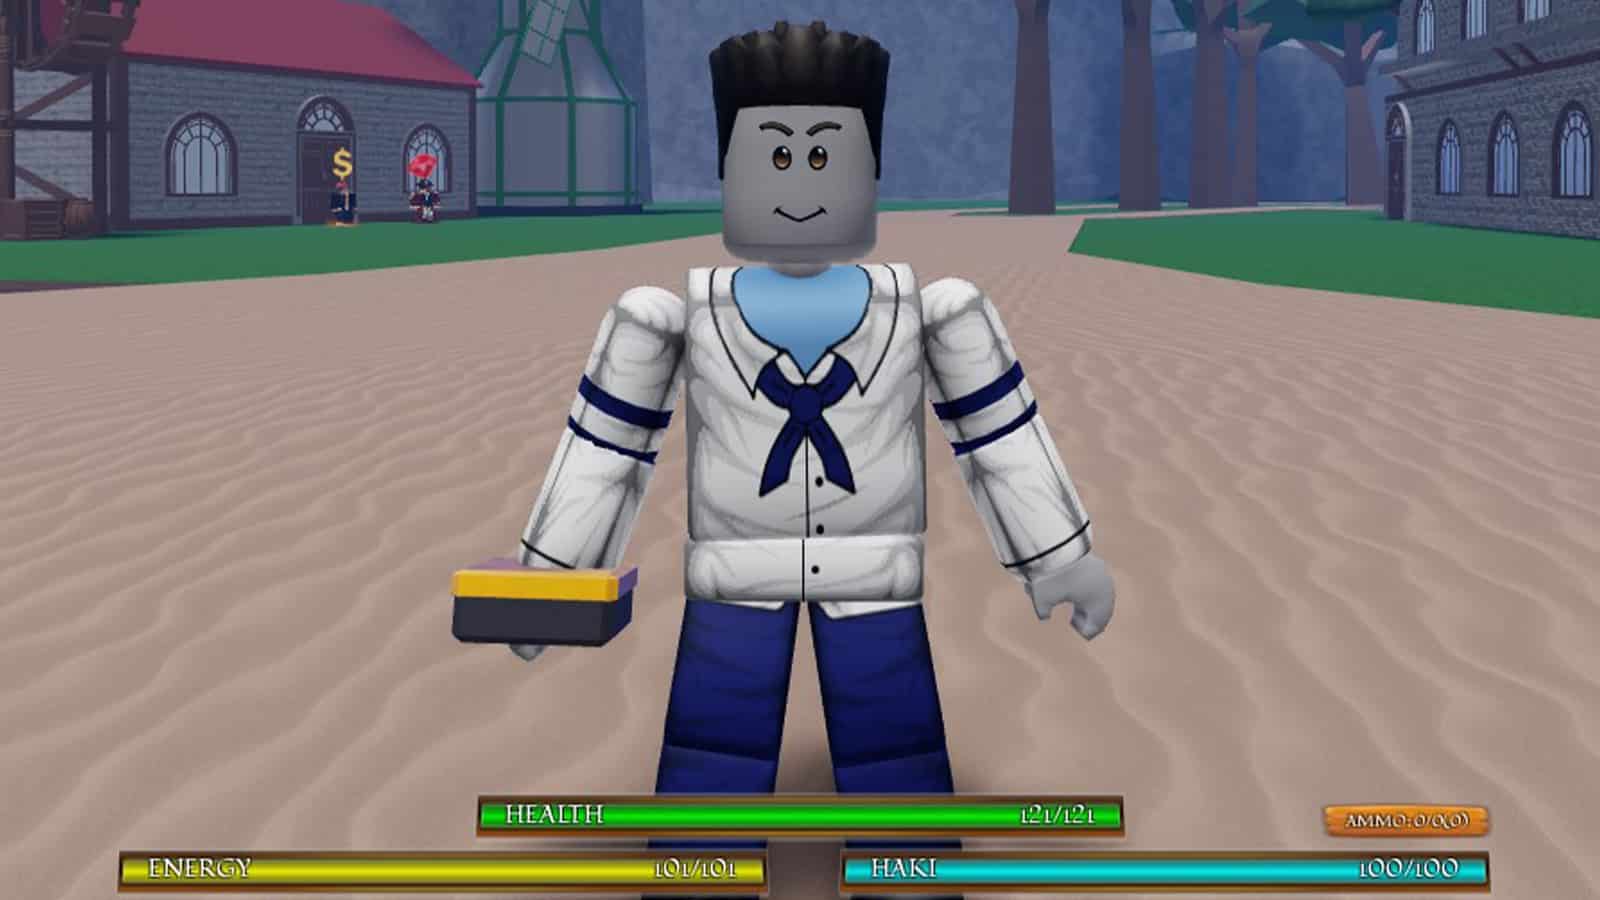 ALL CODES WORK MY HERO MANIA ROBLOX FREE SPIN MARCH 26, 2023 